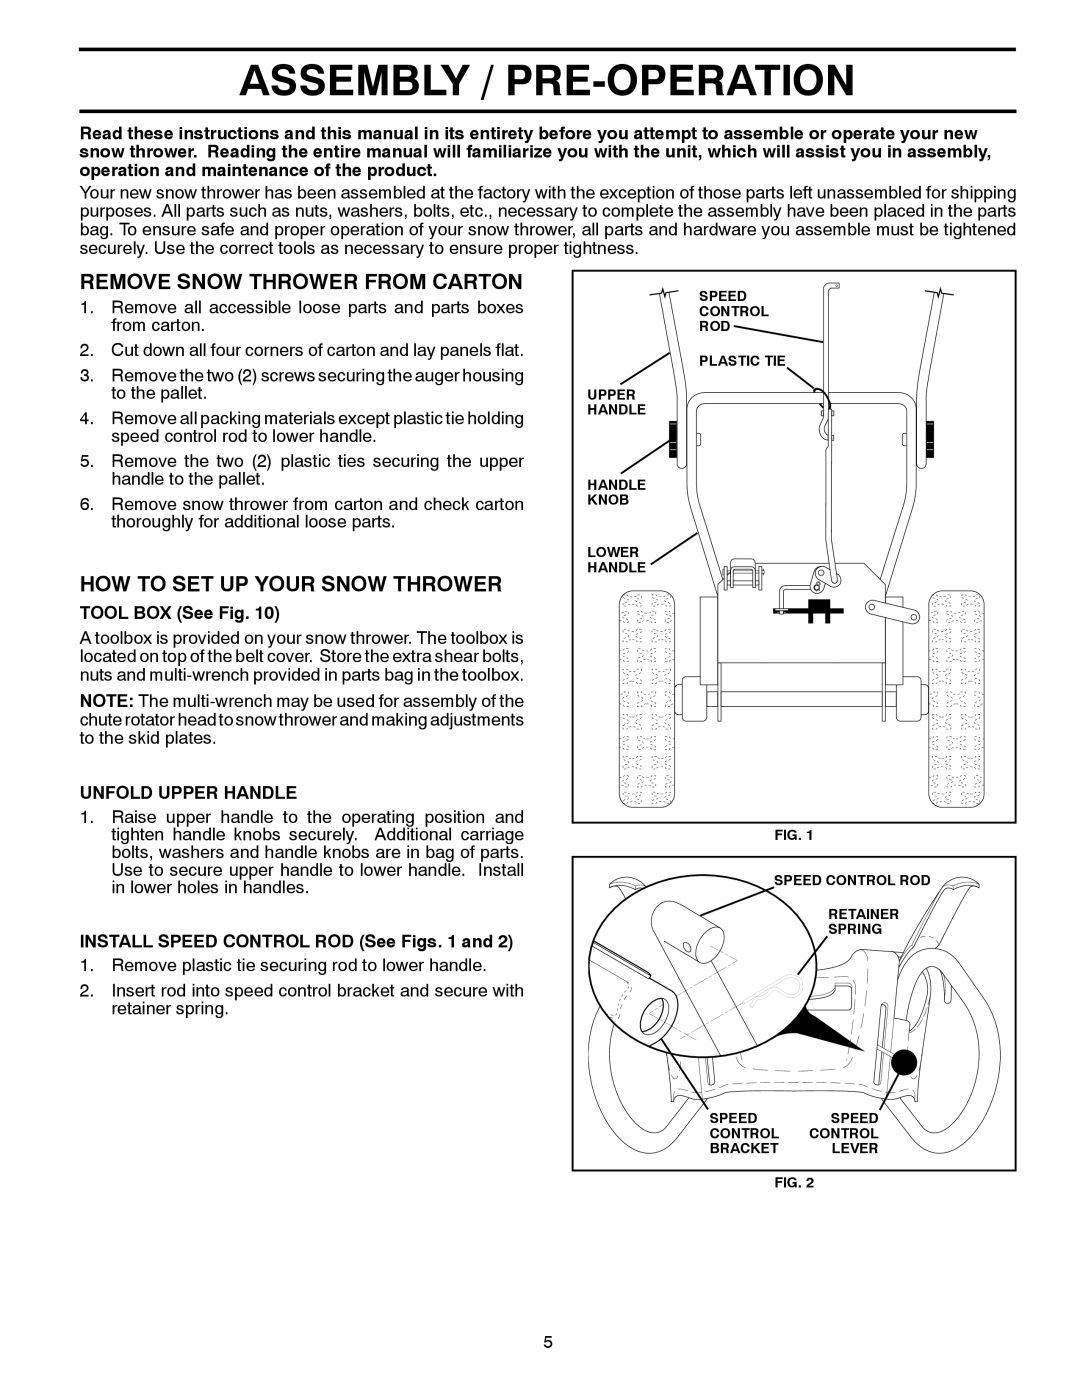 Husqvarna 14527SB-LS manual Assembly / Pre-Operation, Remove Snow Thrower From Carton, How To Set Up Your Snow Thrower 